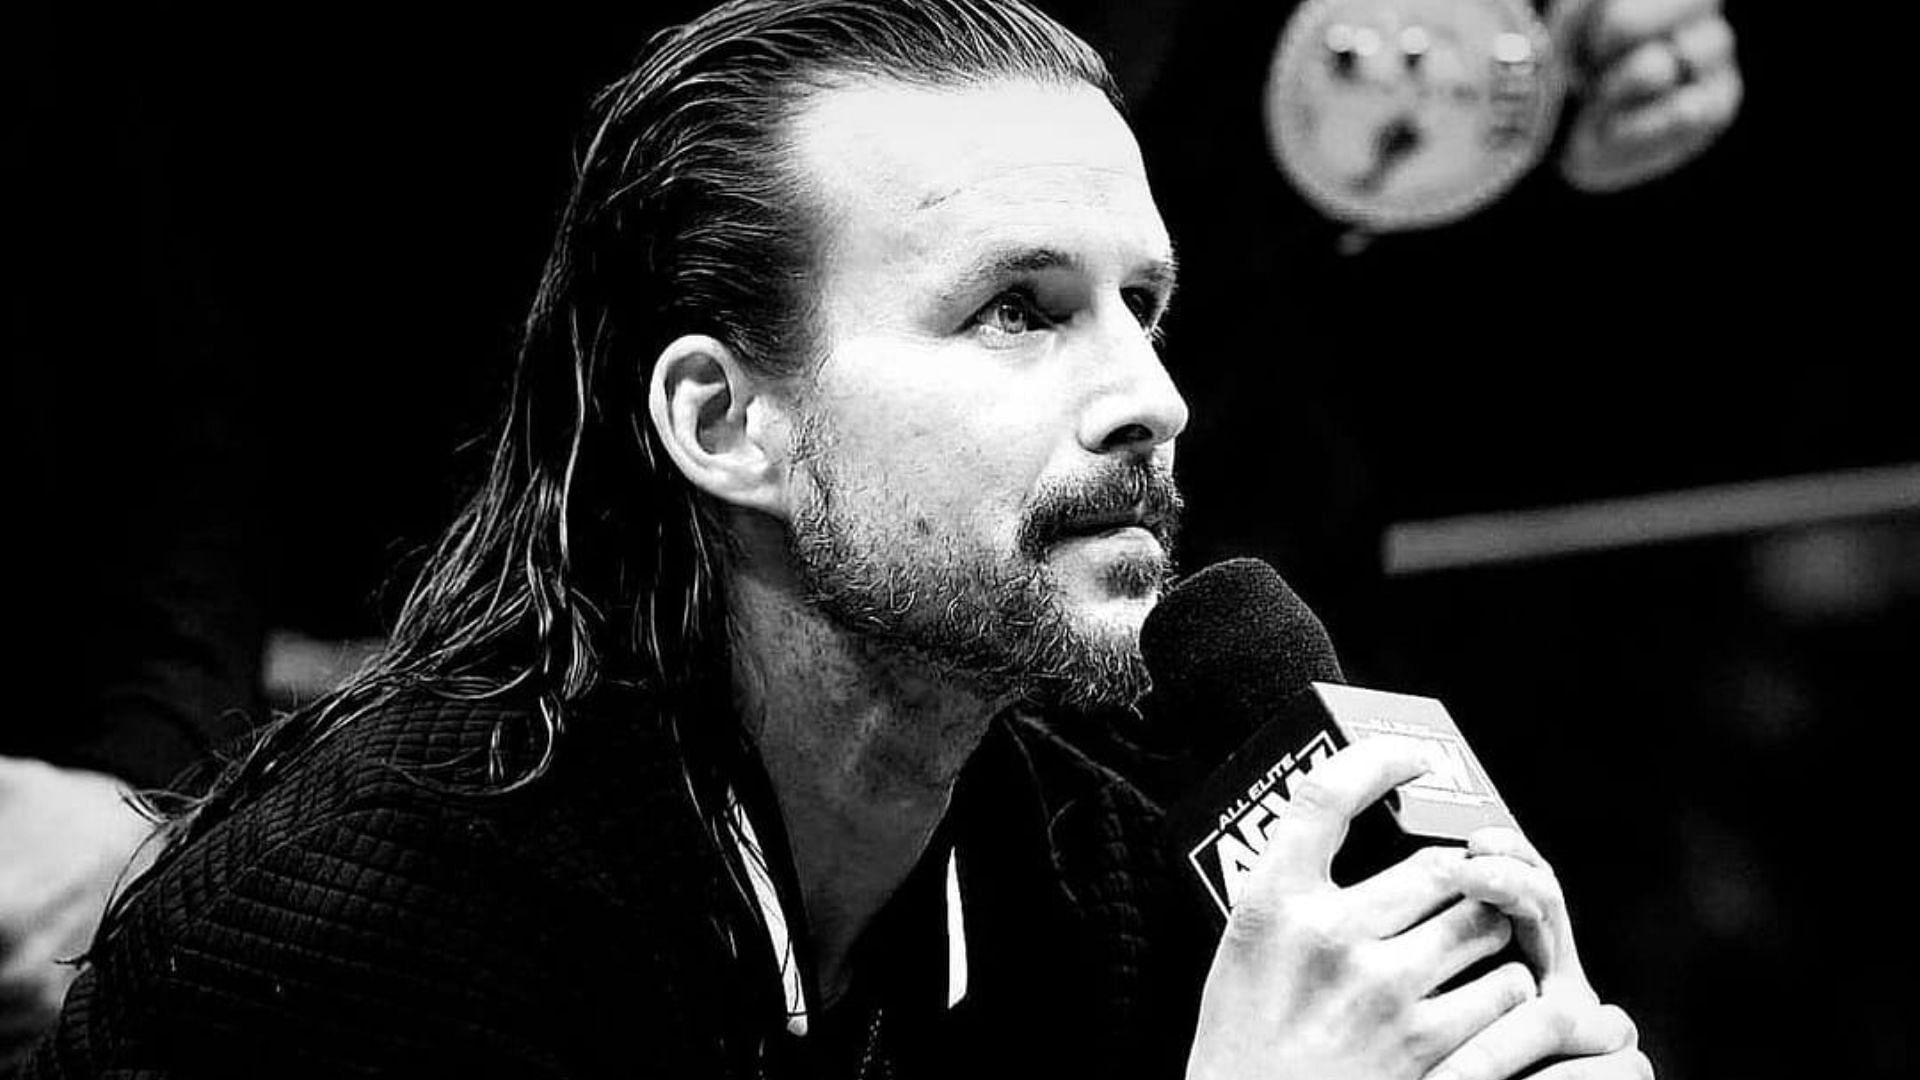 Adam Cole is currently sidelined from AEW